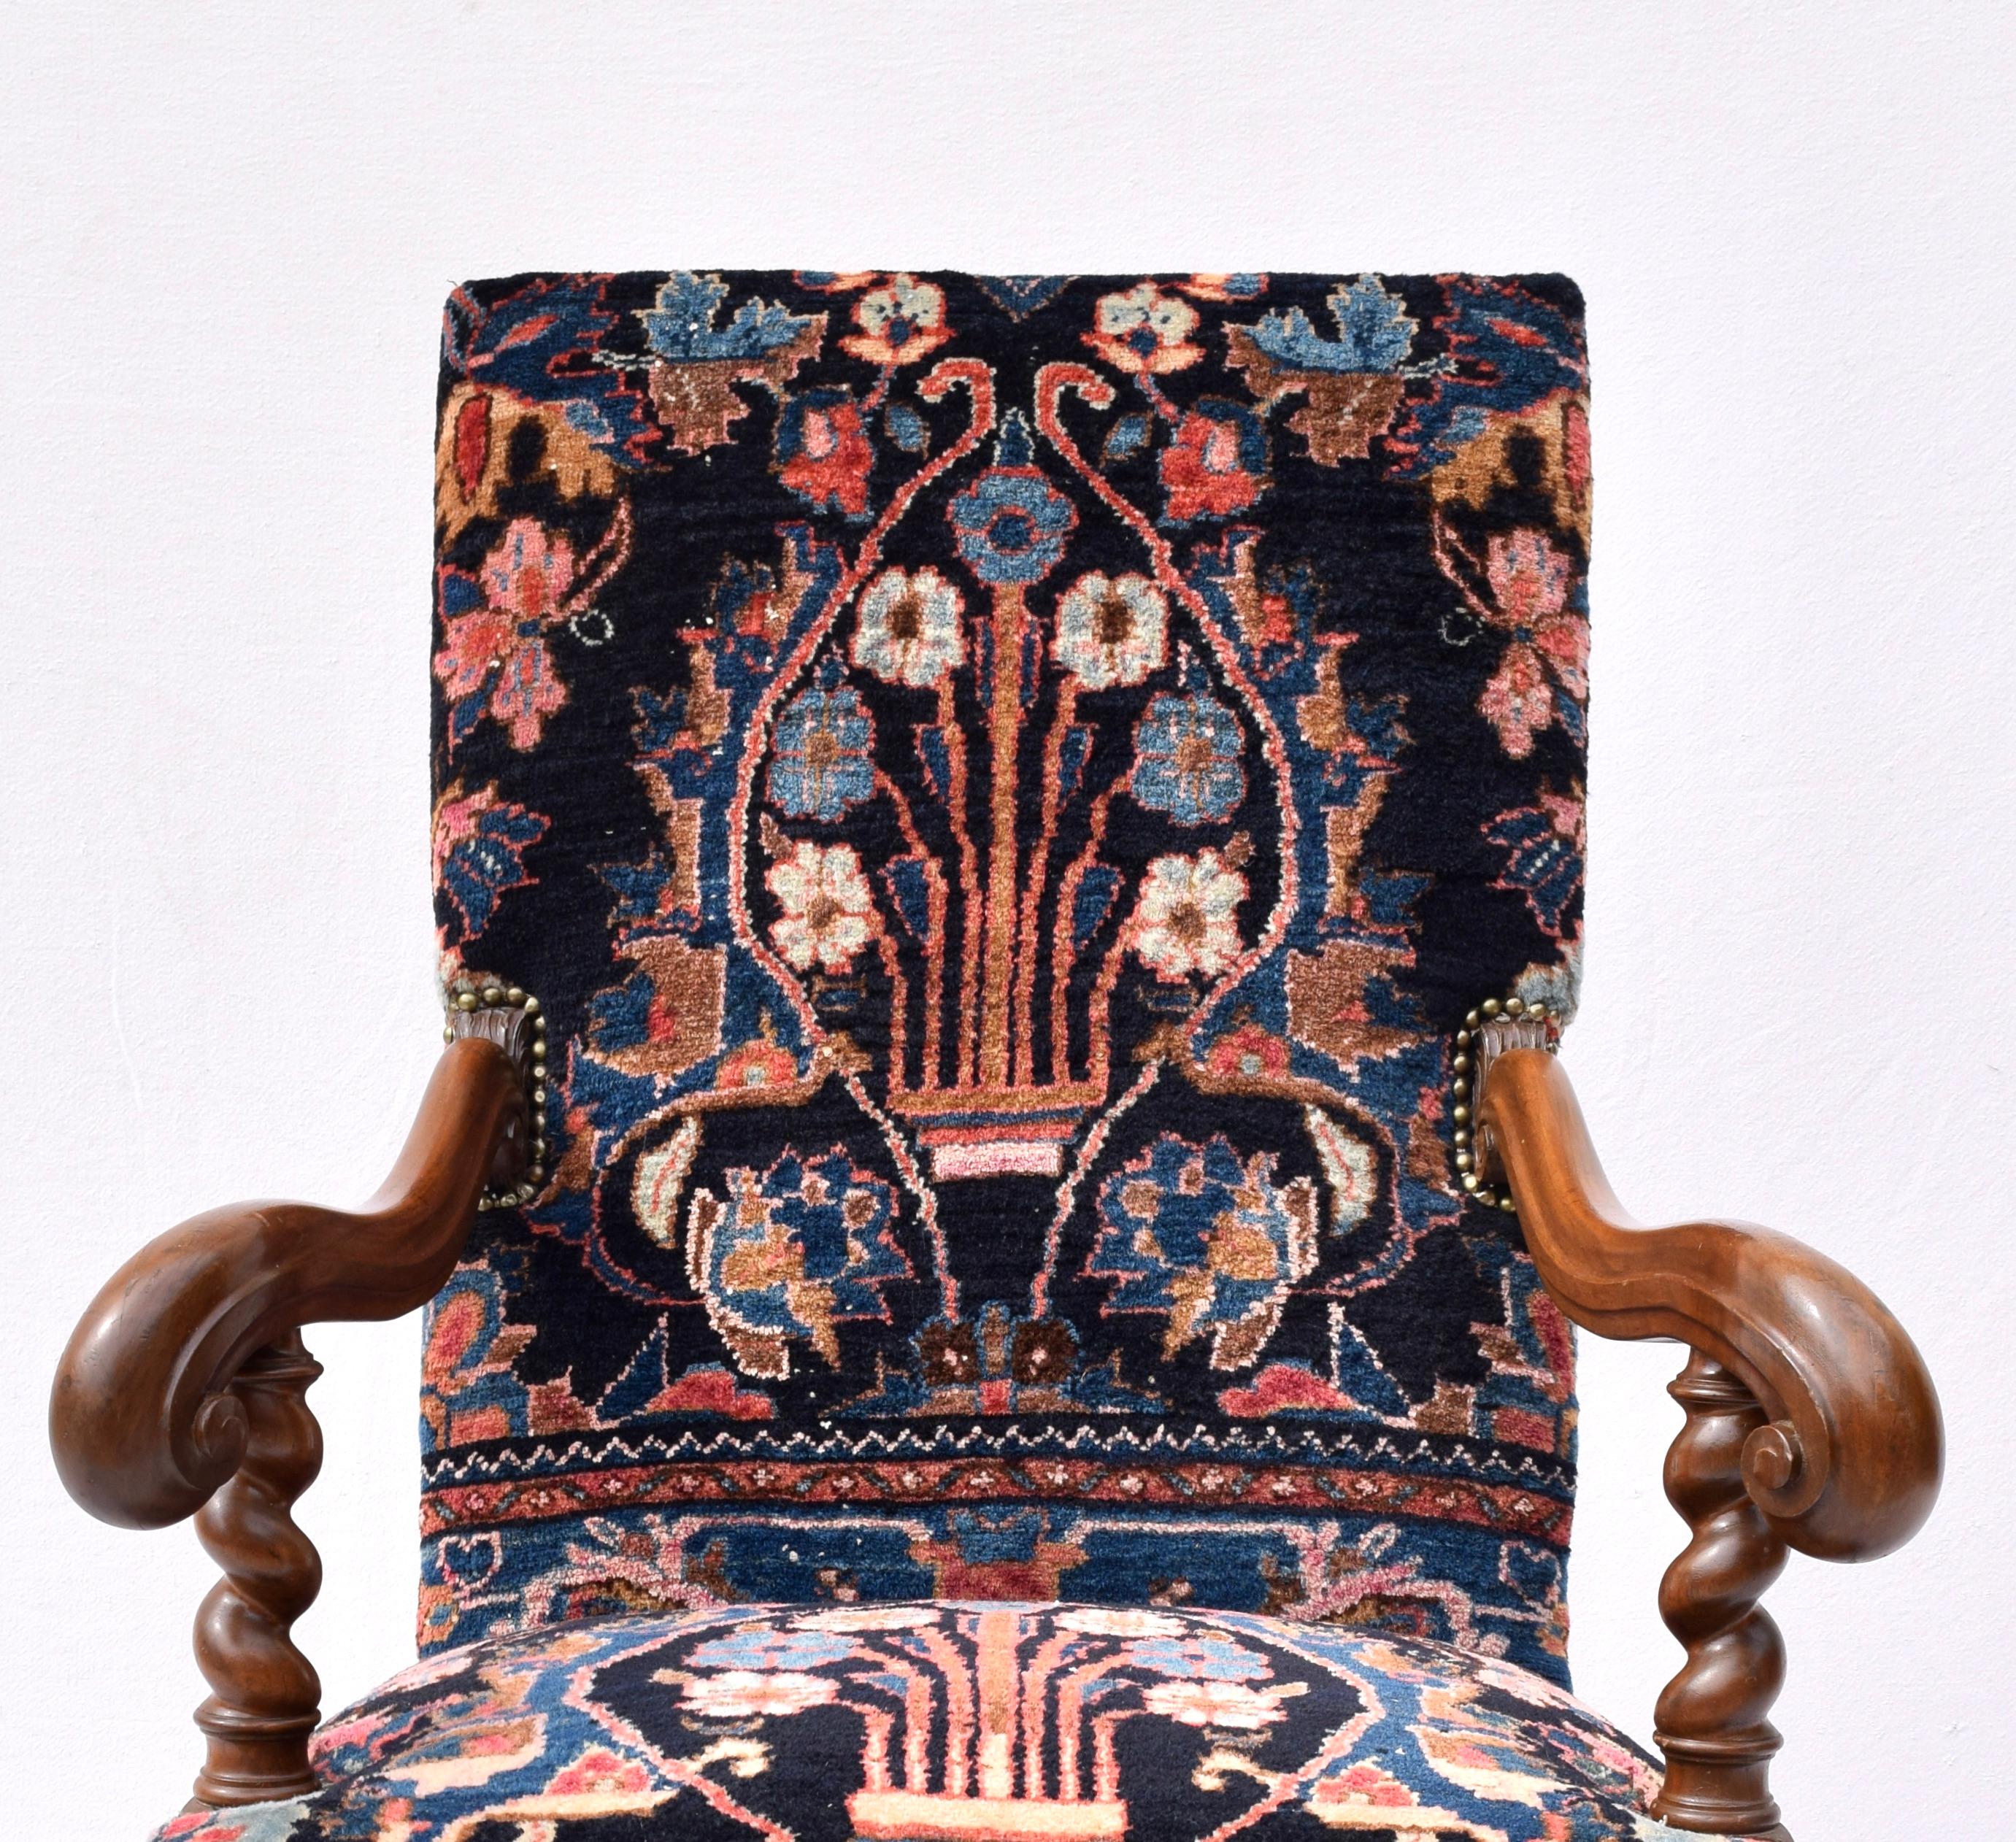 Fully restored one of a kind antique English armchair in its antique oriental carpet upholstery having splayed scroll carved arms with barley twist arm, leg and front stretcher. Solid walnut construction. Measures: Seat height 20